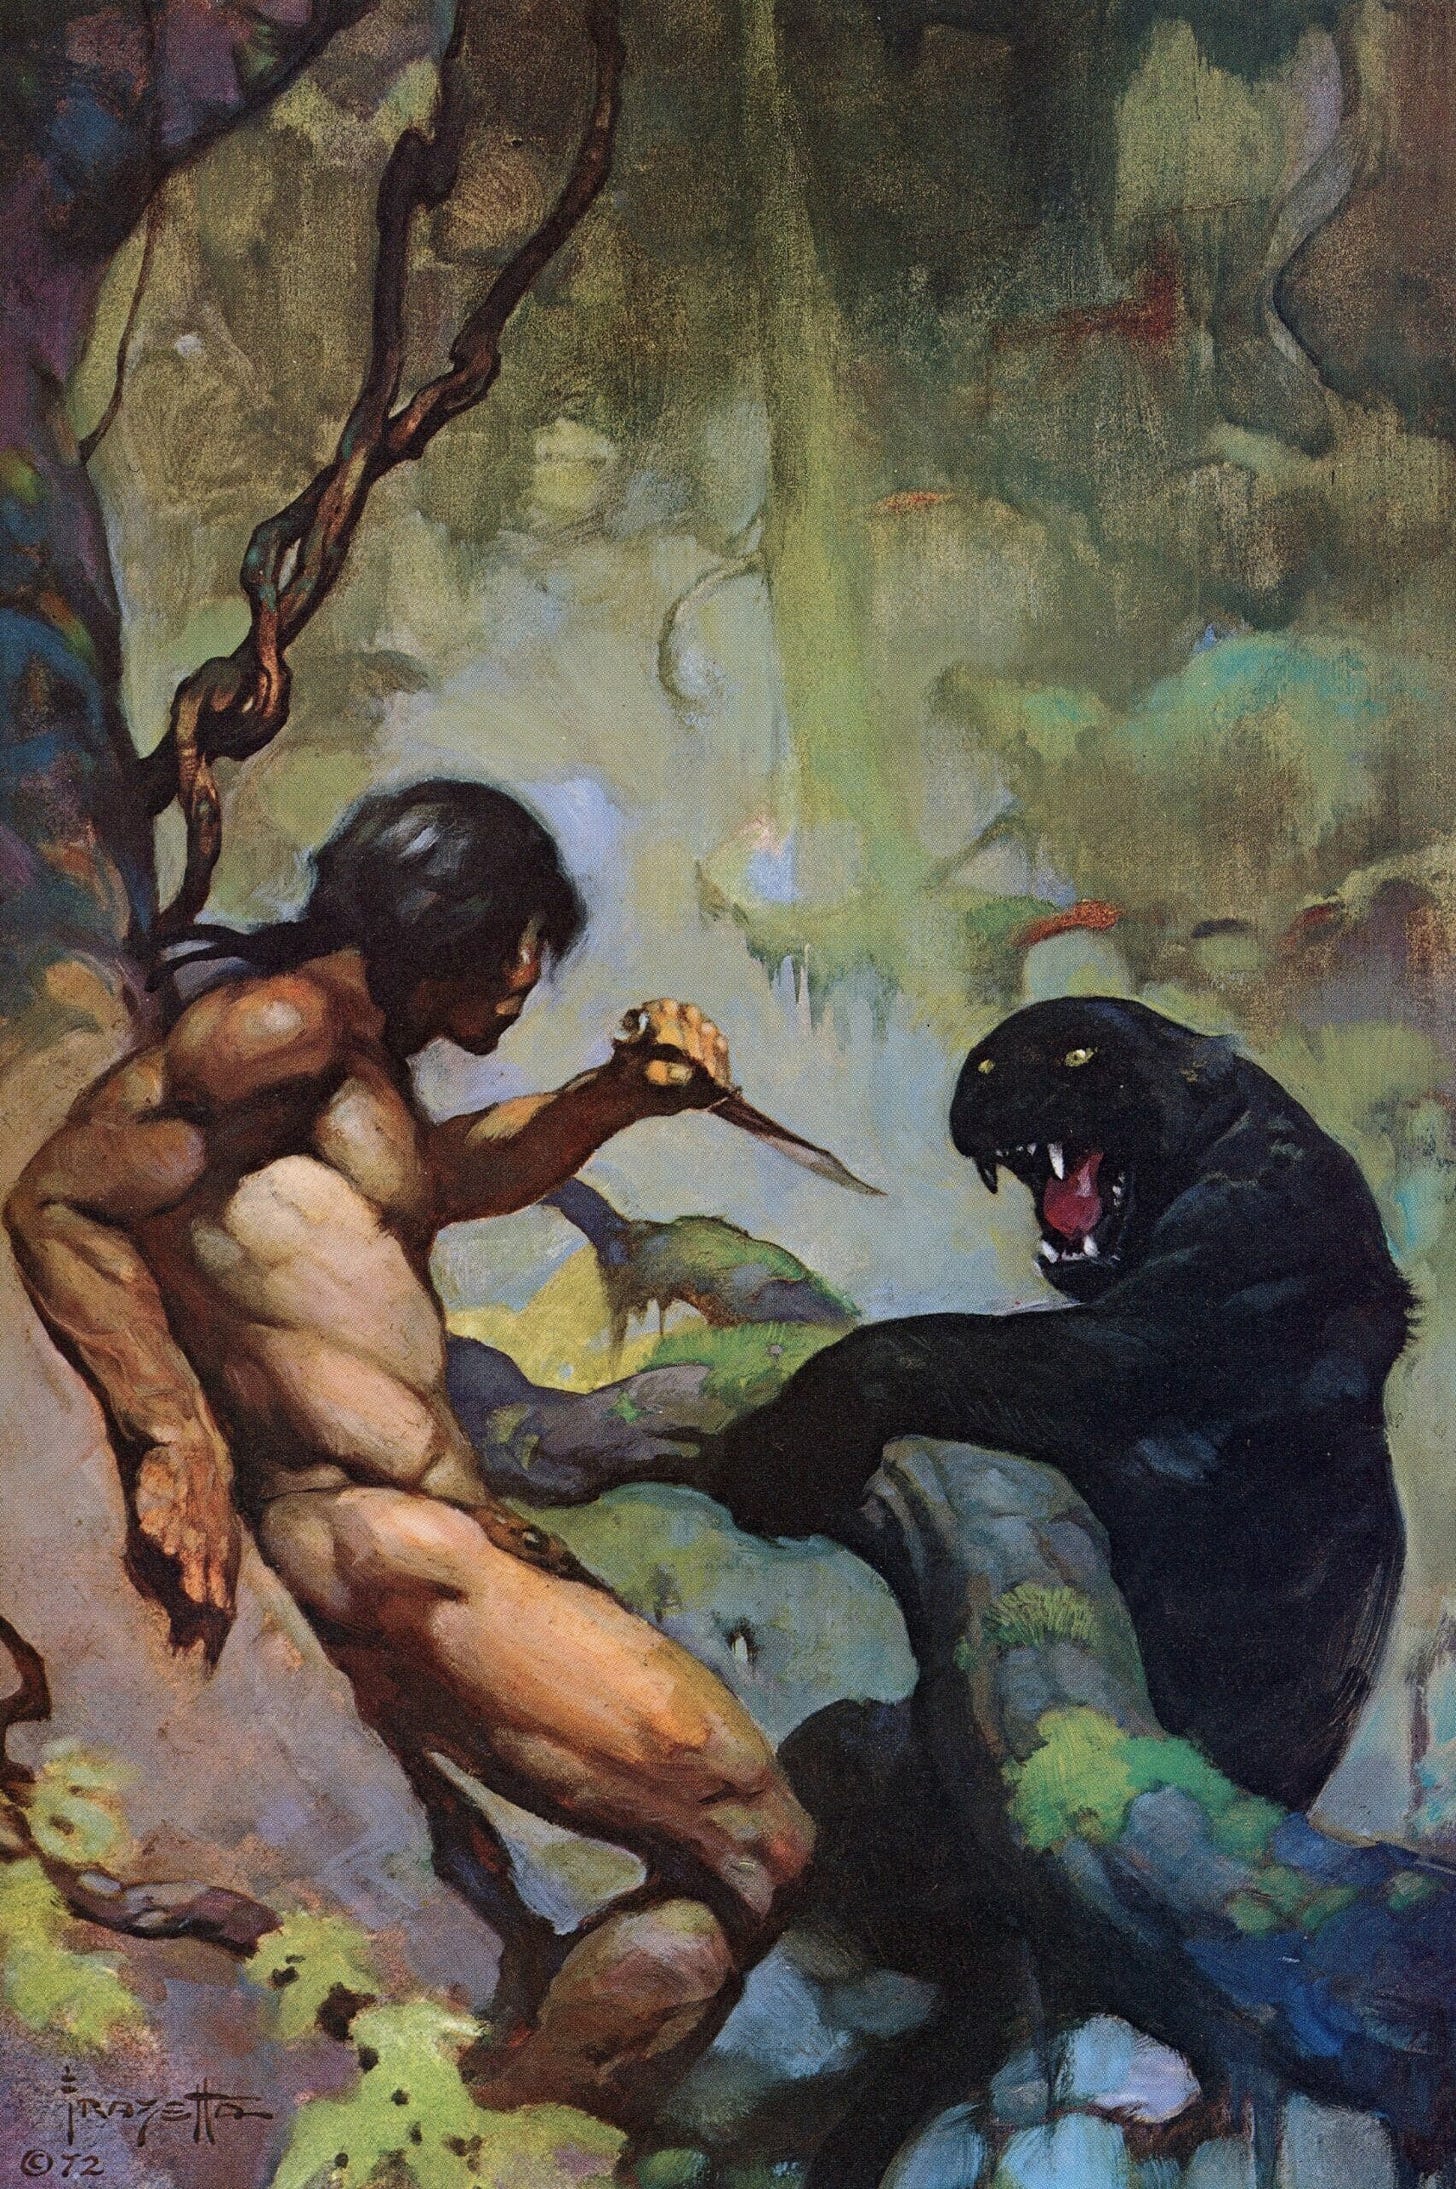 Frank Frazetta - Iconic Pieces From A Legend - NeoText